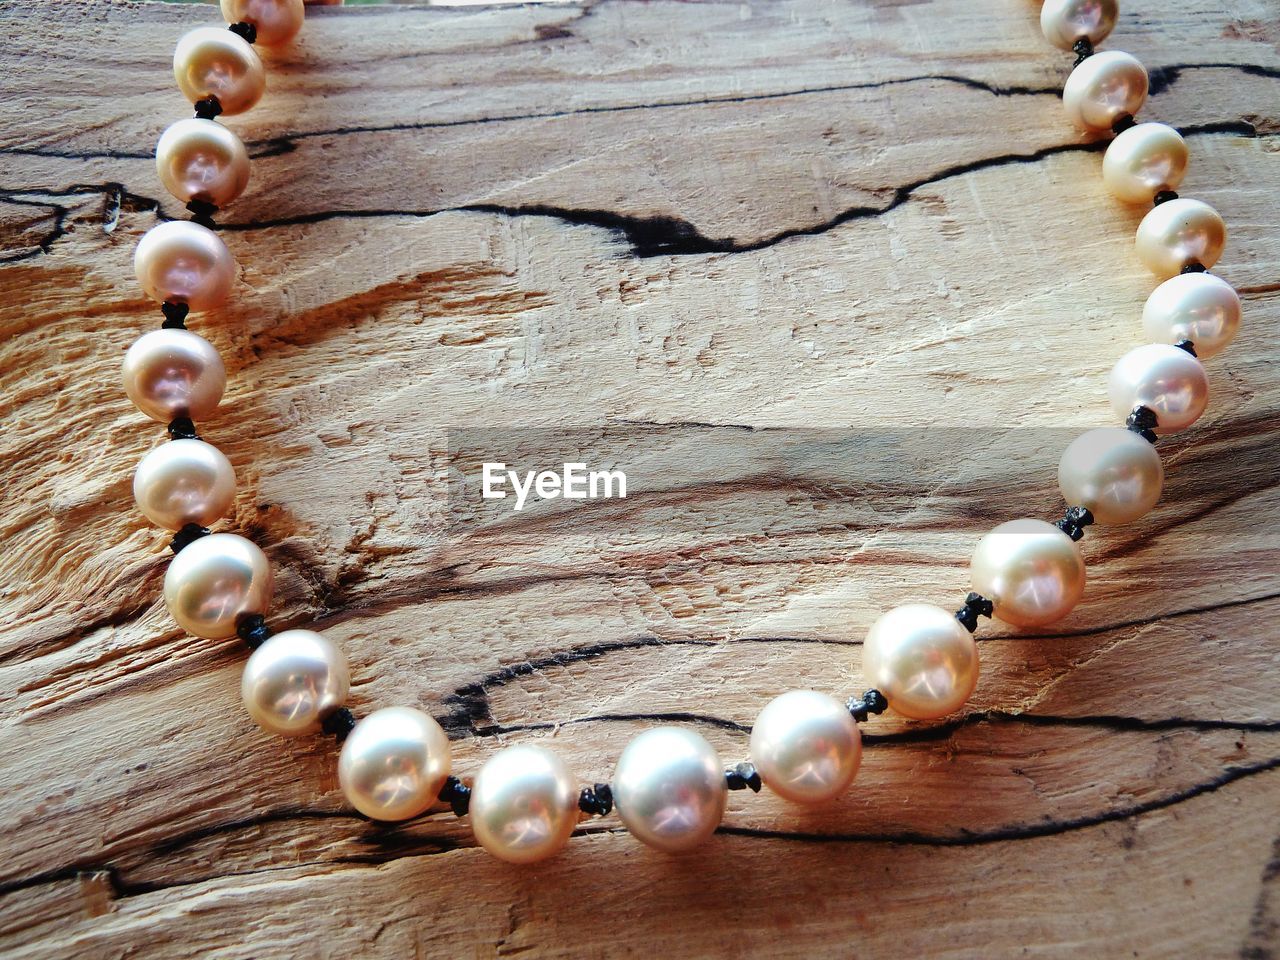 Close-up of pearl necklace on table